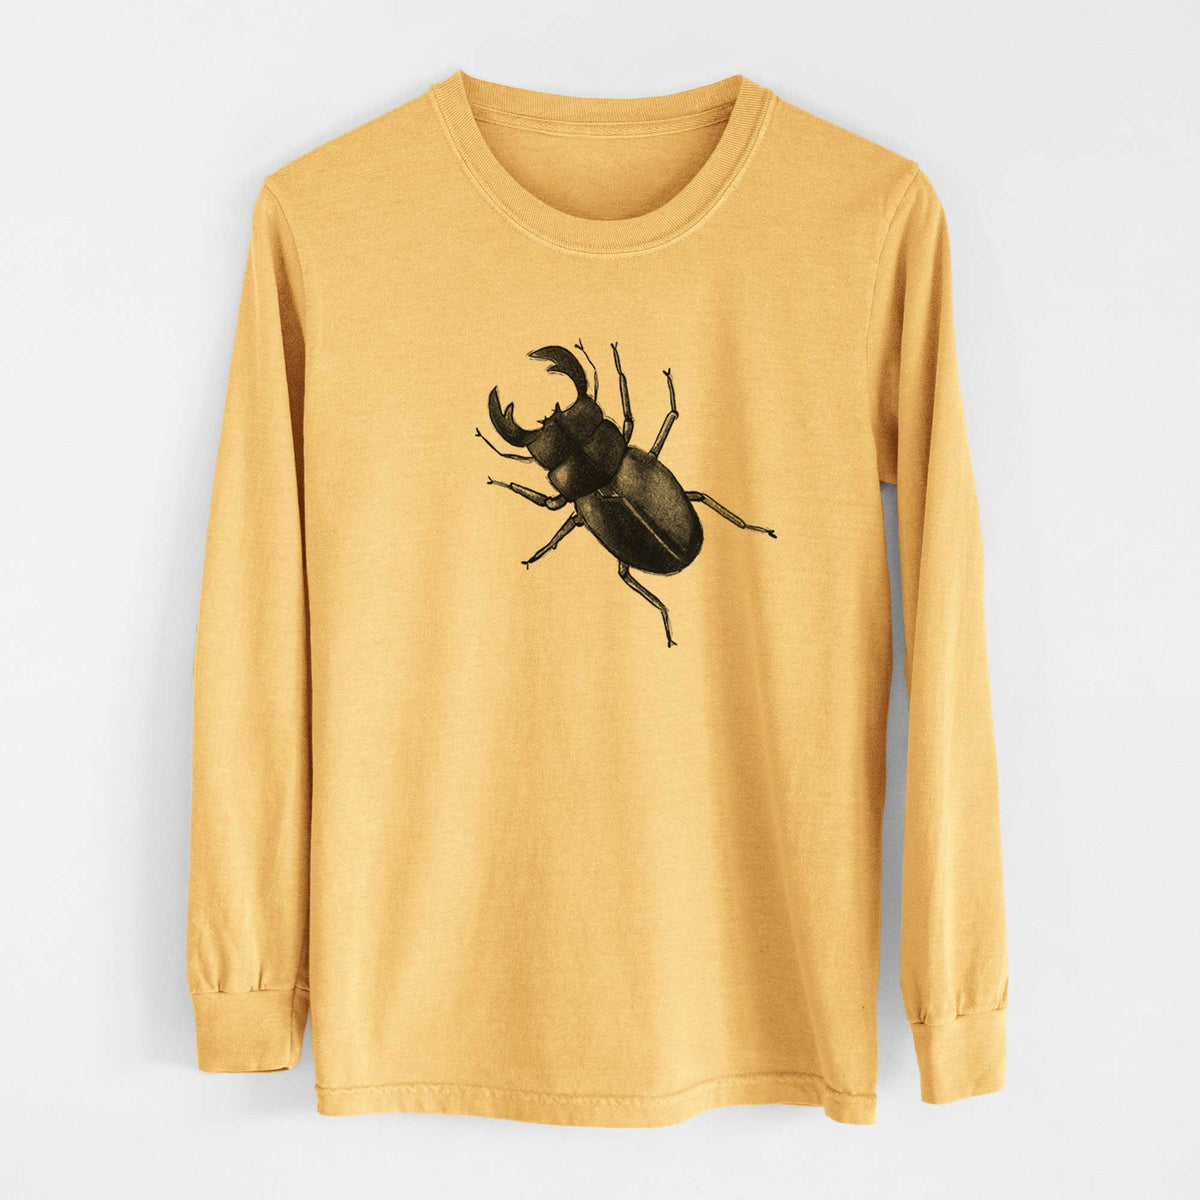 Dorcus titanus - Giant Stag Beetle - Heavyweight 100% Cotton Long Sleeve